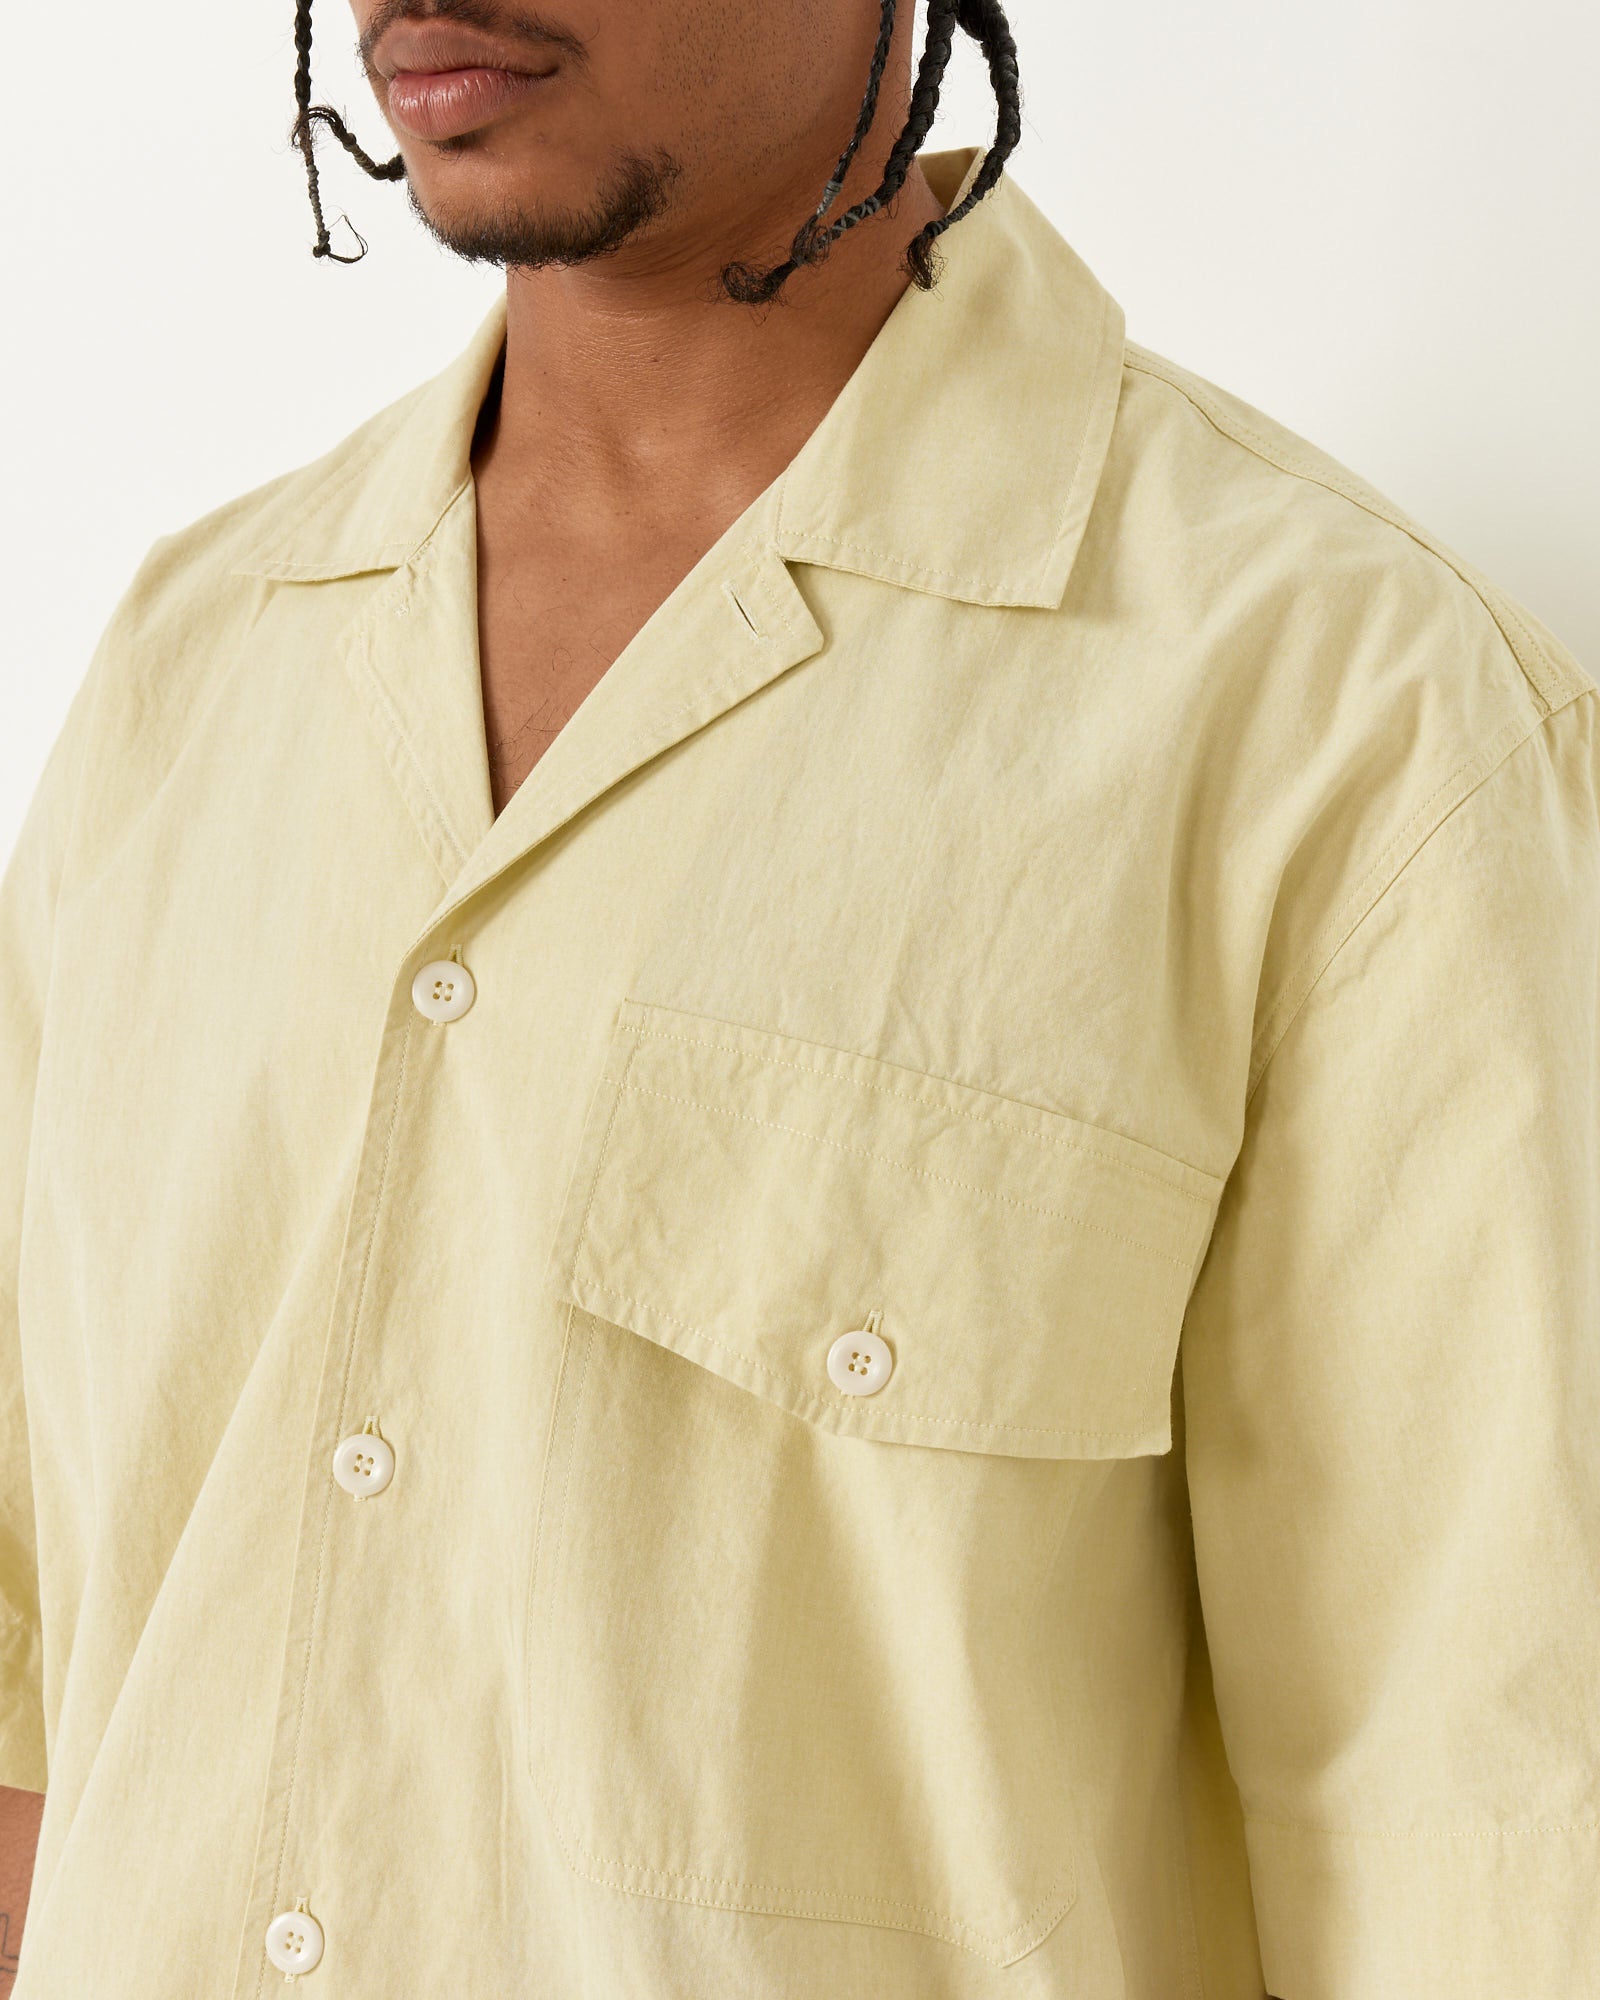 Flap Pocket Shirt in Pale Yellow